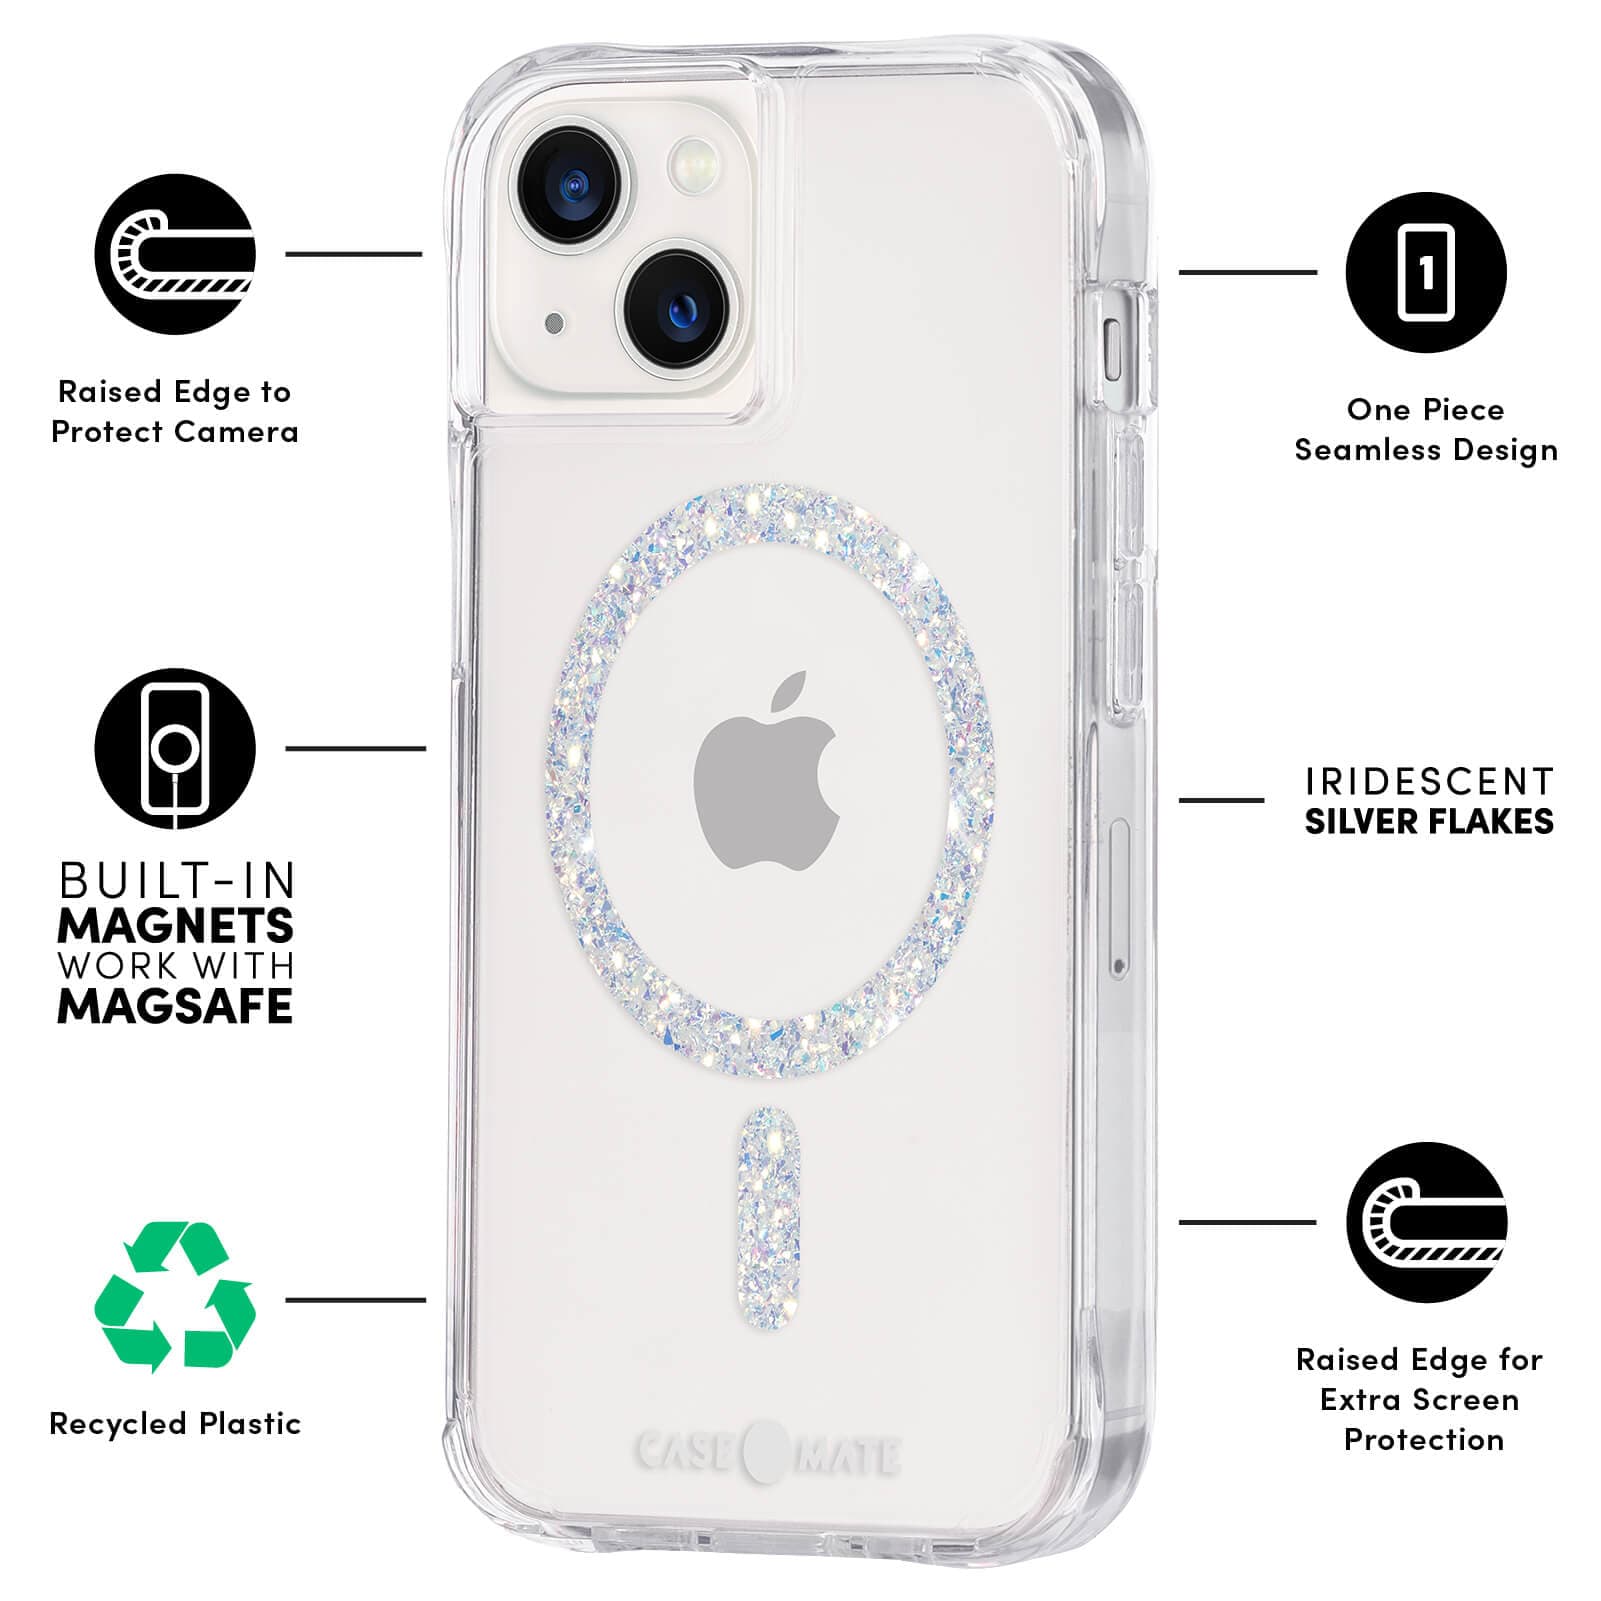 FEATURES: RAISED EDGE TO PROTECT CAMERA, BUILT IN MAGNETS WORK WITH MAGSAFE, RECYCLED PLASTIC, ONE PIECE SEAMLESS DESIGN, IRIDESCENT SILVER FLAKES, RAISED EDGE FOR EXTRA SCREEN PROTECTION. COLOR::TWINKLE STARDUST